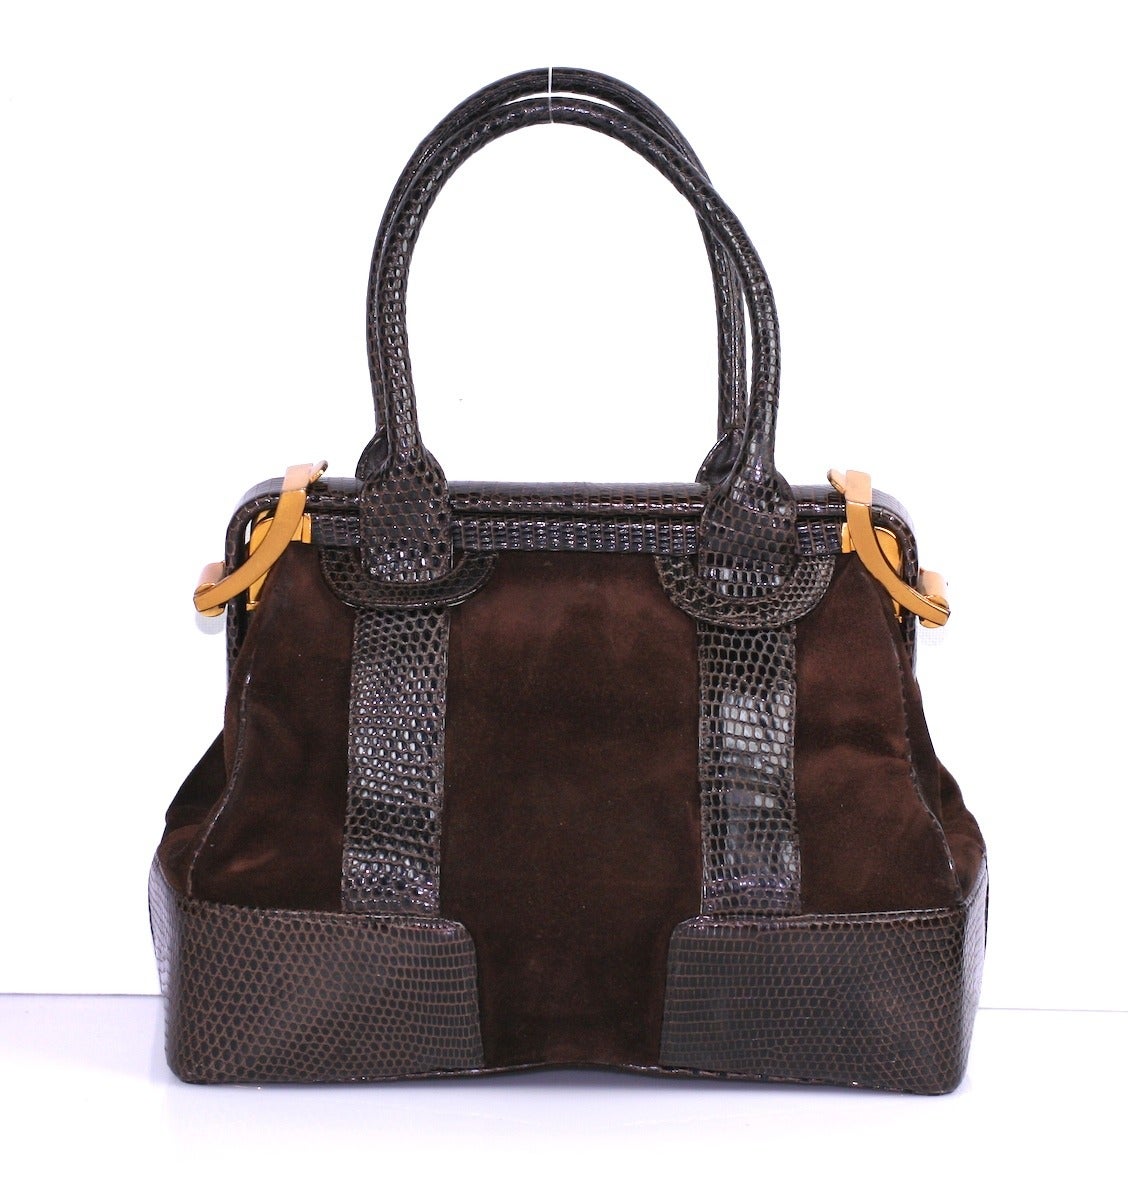 Judith Leiber Suede and Snake Satchel with unusual gilt hardware closures on top corners. Elegant, timeless bag.  8.5